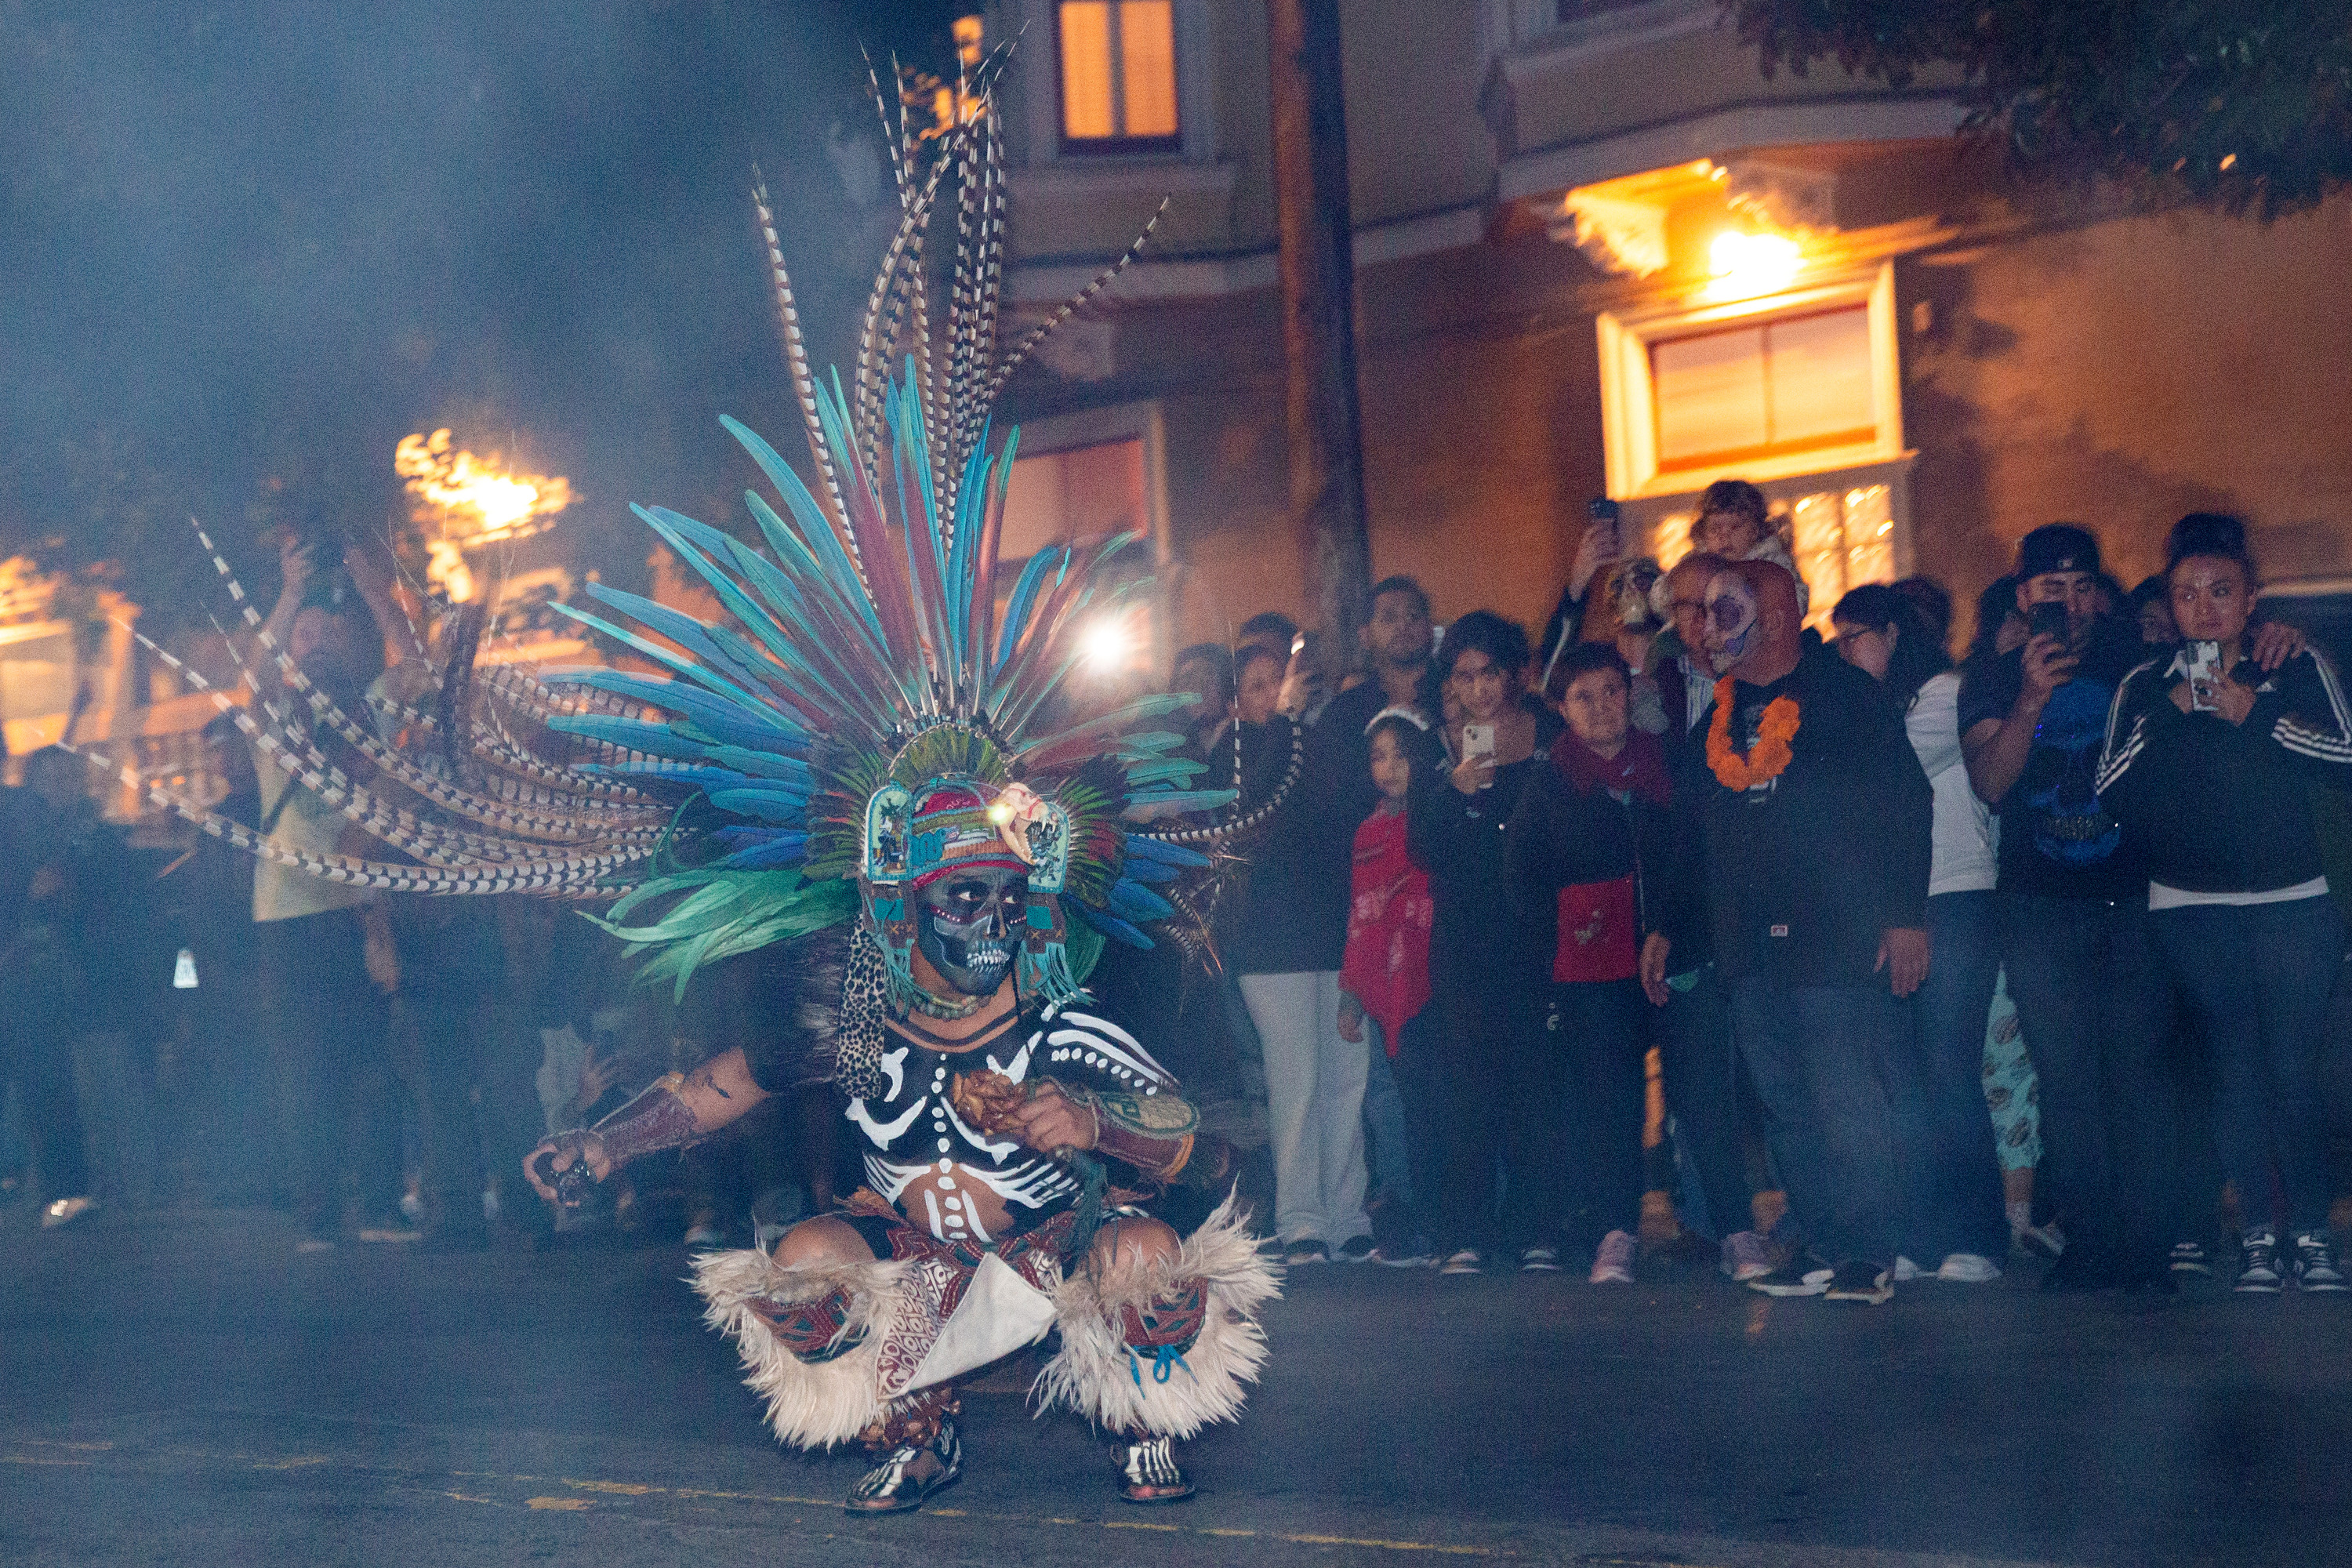 A person dressed in a feather headdress and costume performs on a smoky city street as people look on in the background